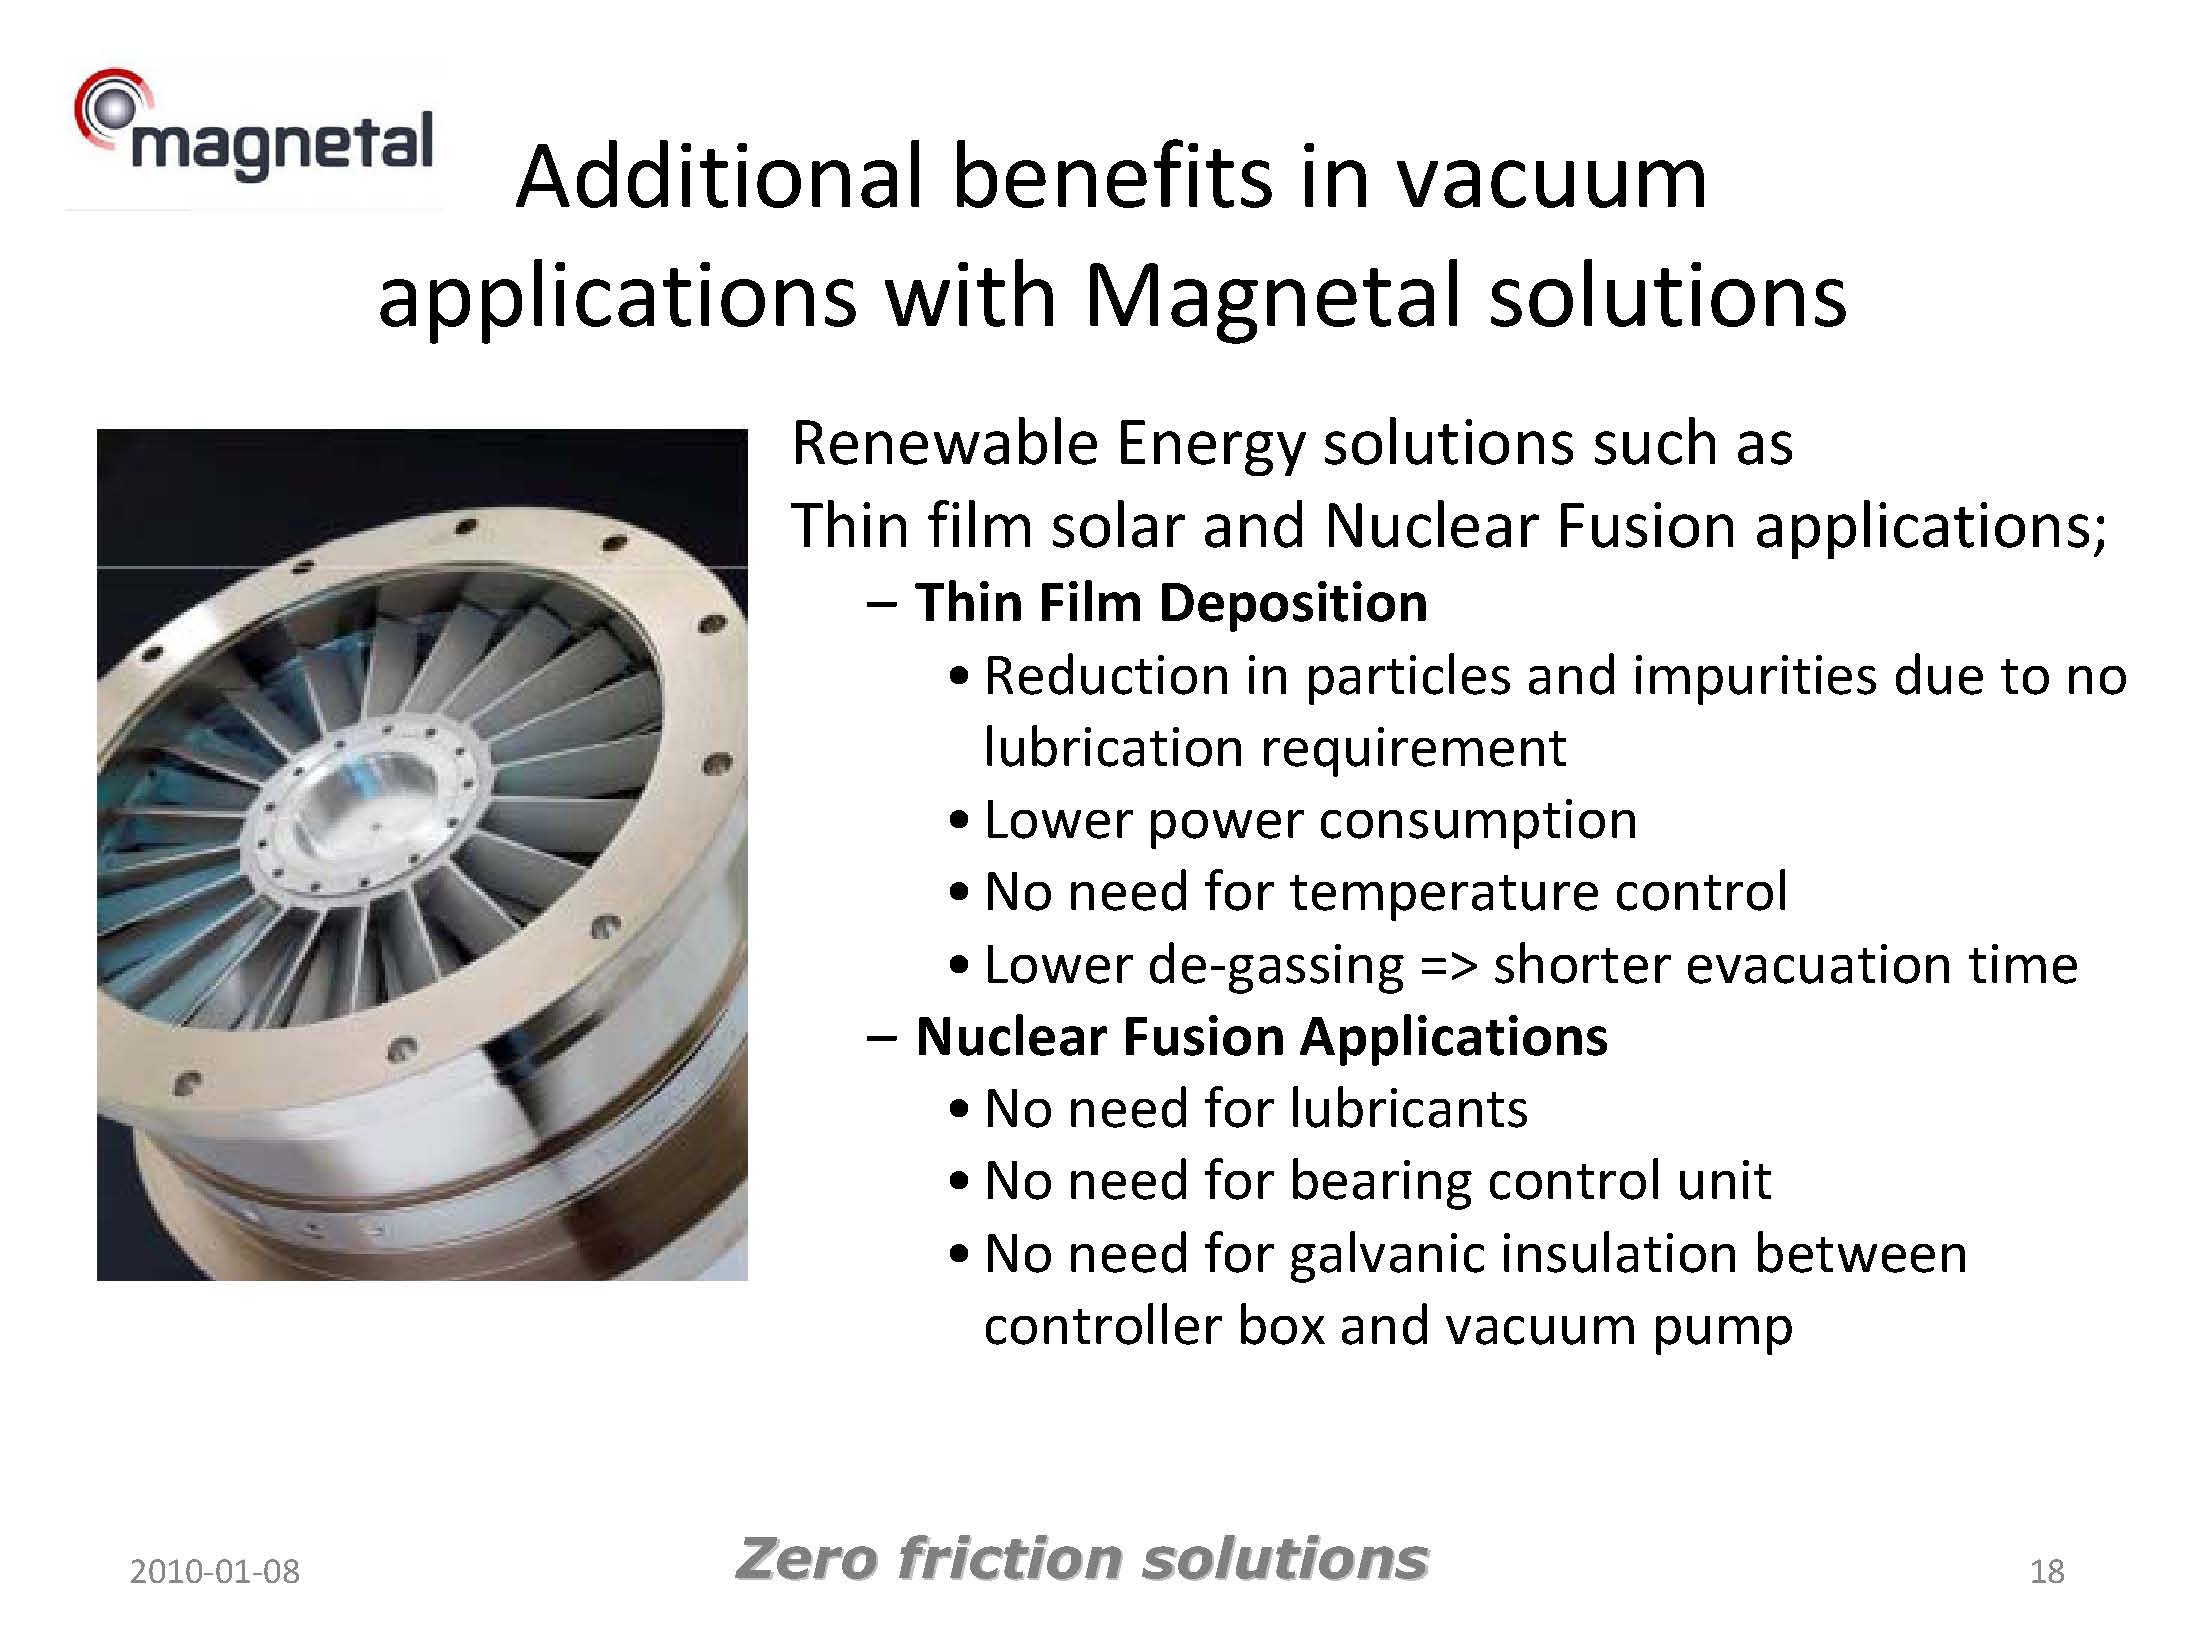 Additional Added Value to Vacuum Technology by Using Magnetal Passive Magnetic Bearings